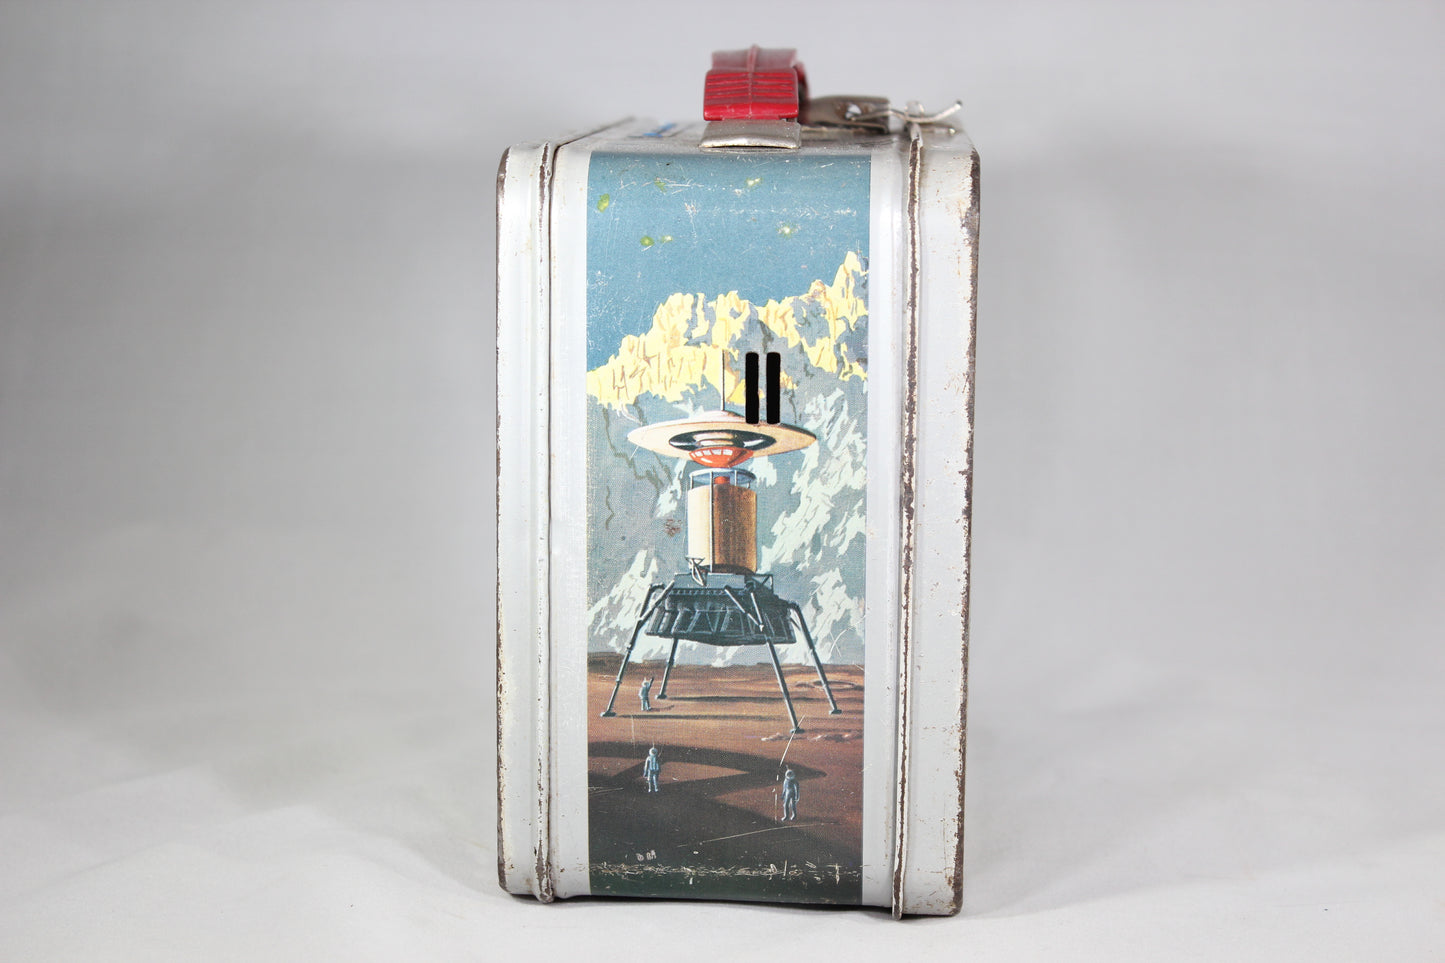 Retro Futuristic Outer Space Themed Thermos Brand Metal Lunchbox, 1950s